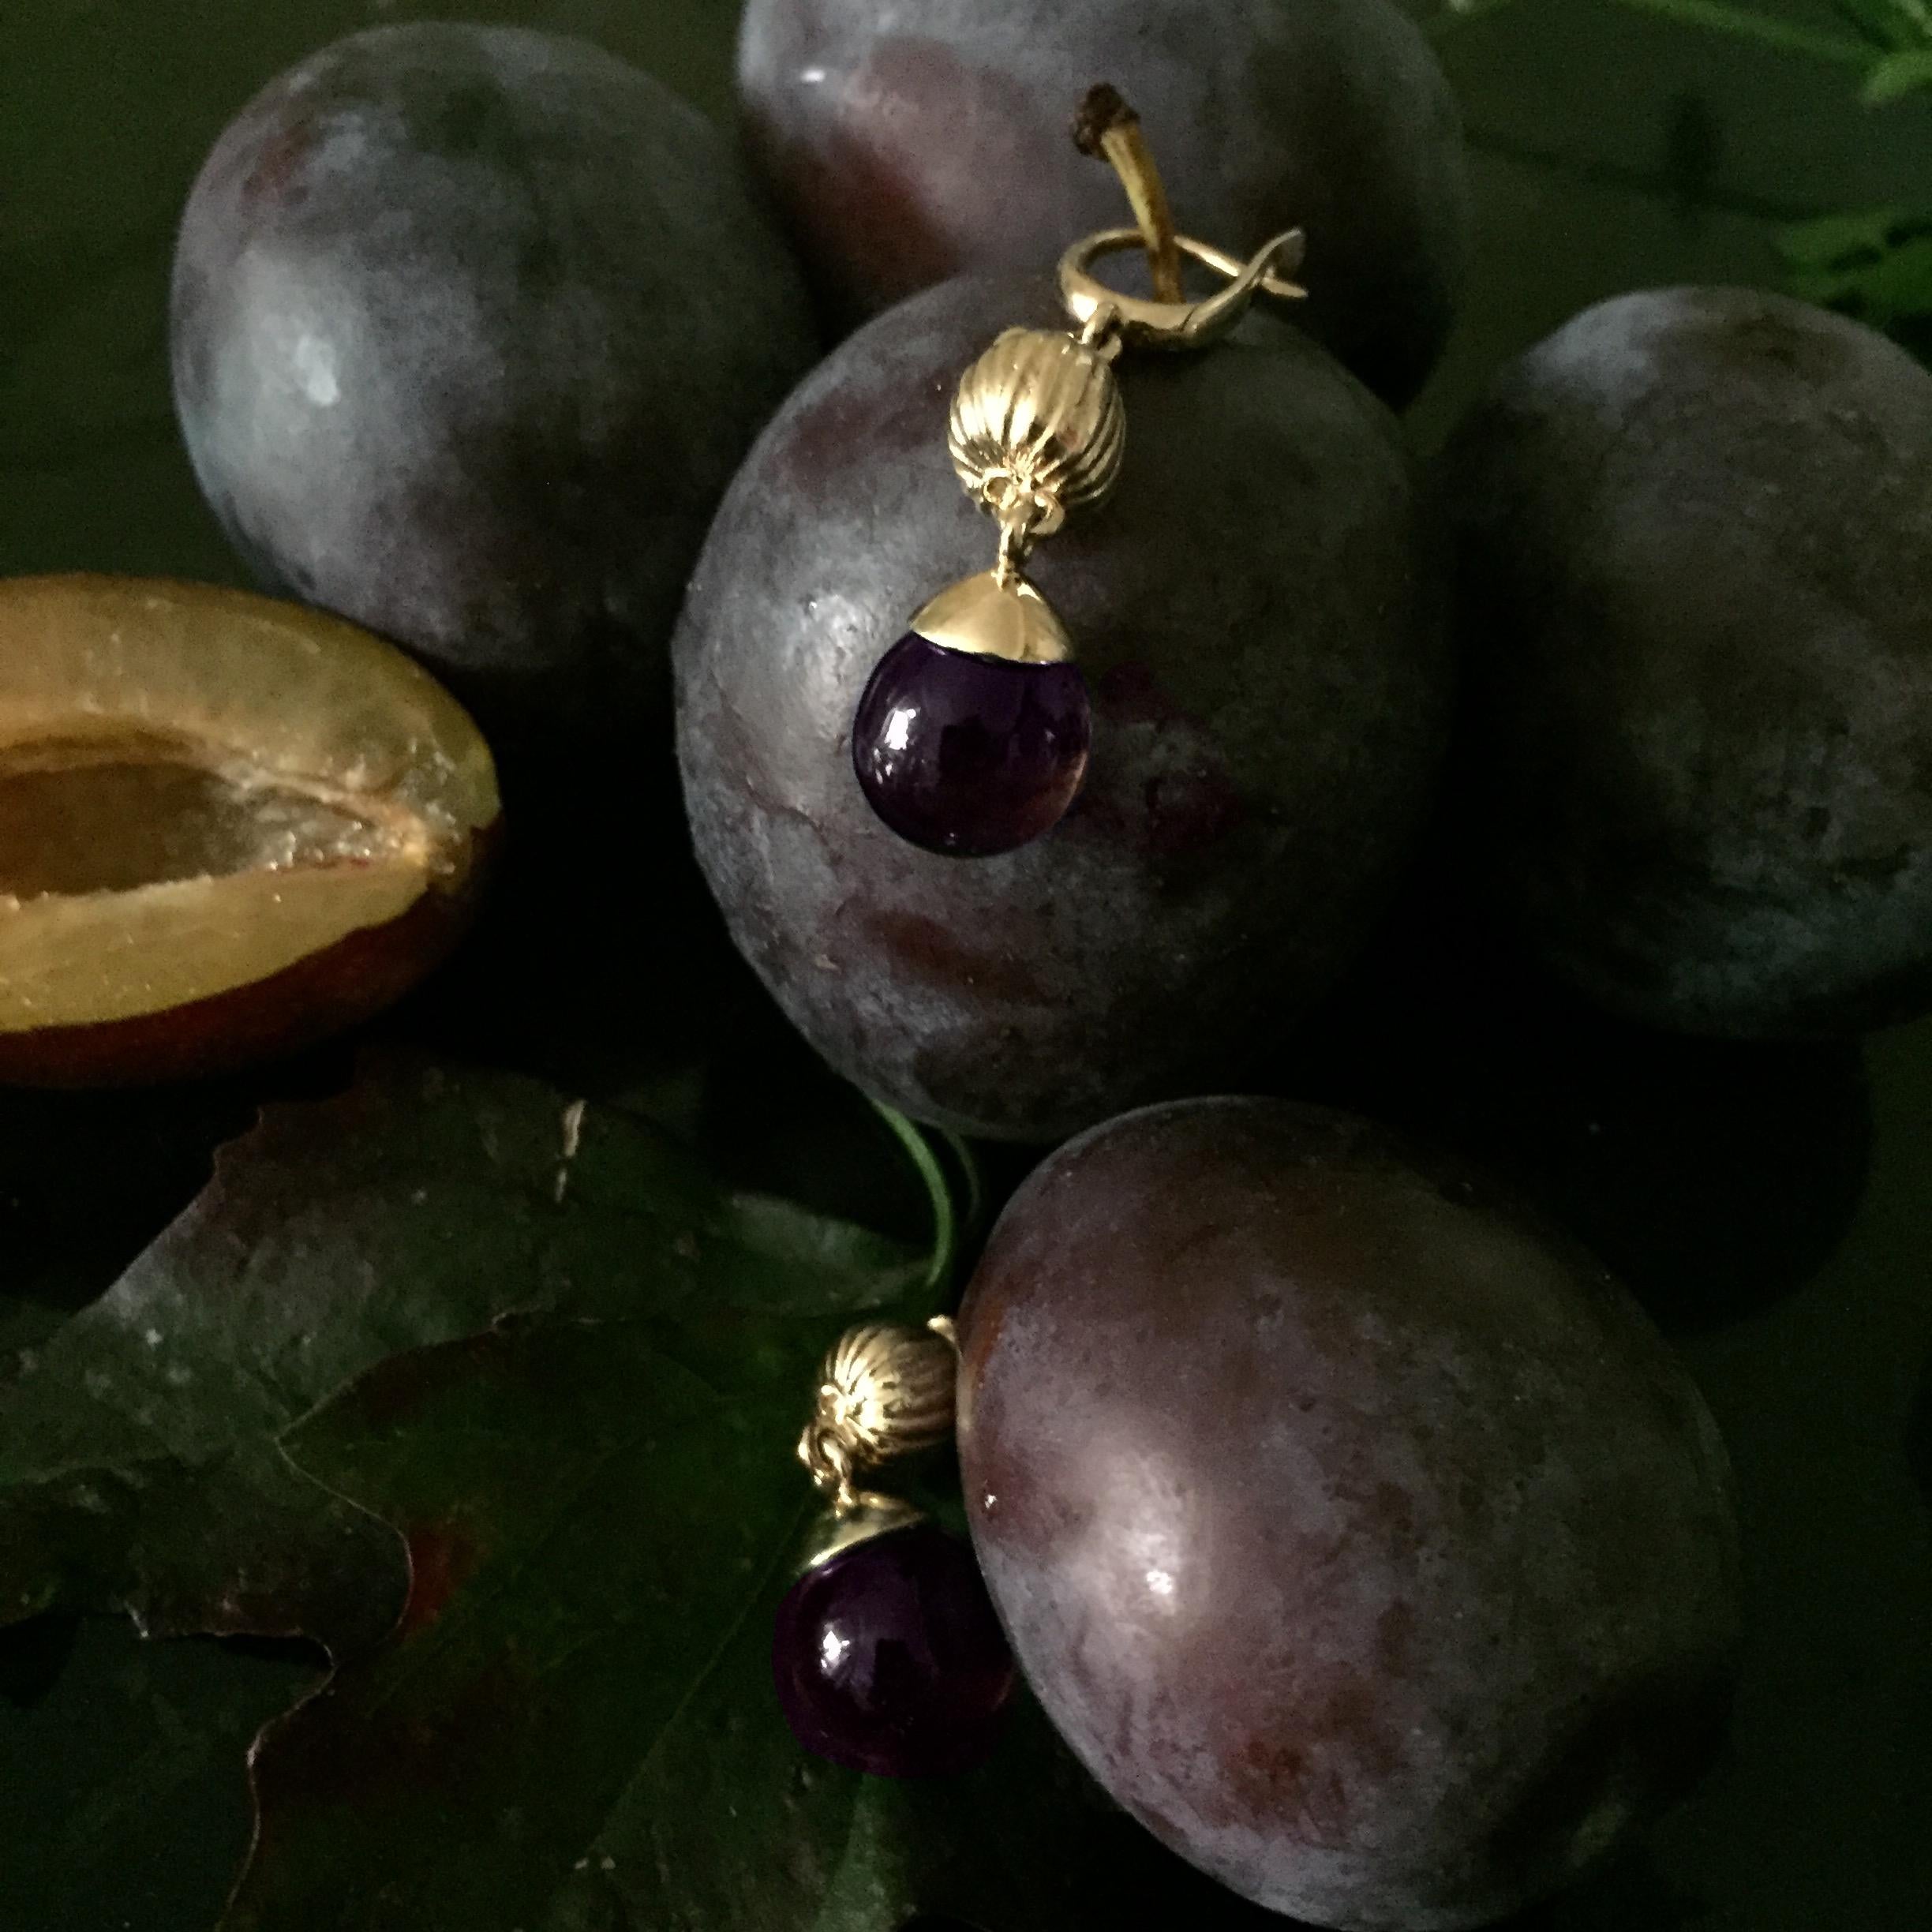 These Fig cocktail drop earrings are crafted from 14 karat yellow gold and feature detachable cabochon amethyst drops, along with two black diamonds. The earrings were featured in a Vogue UA review. We use top natural diamonds VS, F-G, and work with